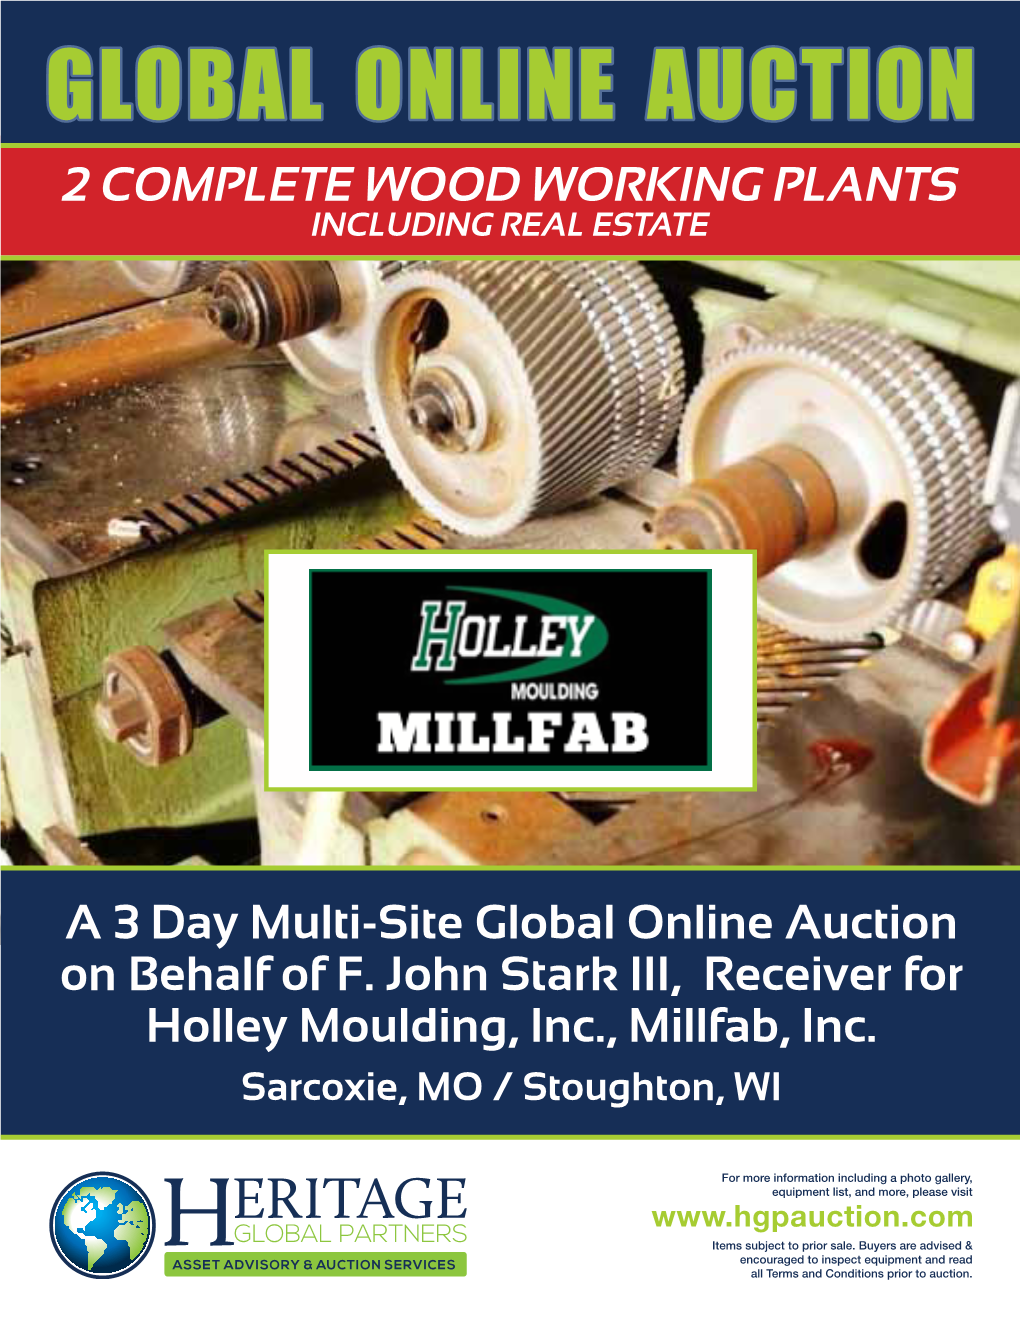 GLOBAL ONLINE AUCTION 2 Complete Wood Working Plants Including Real Estate